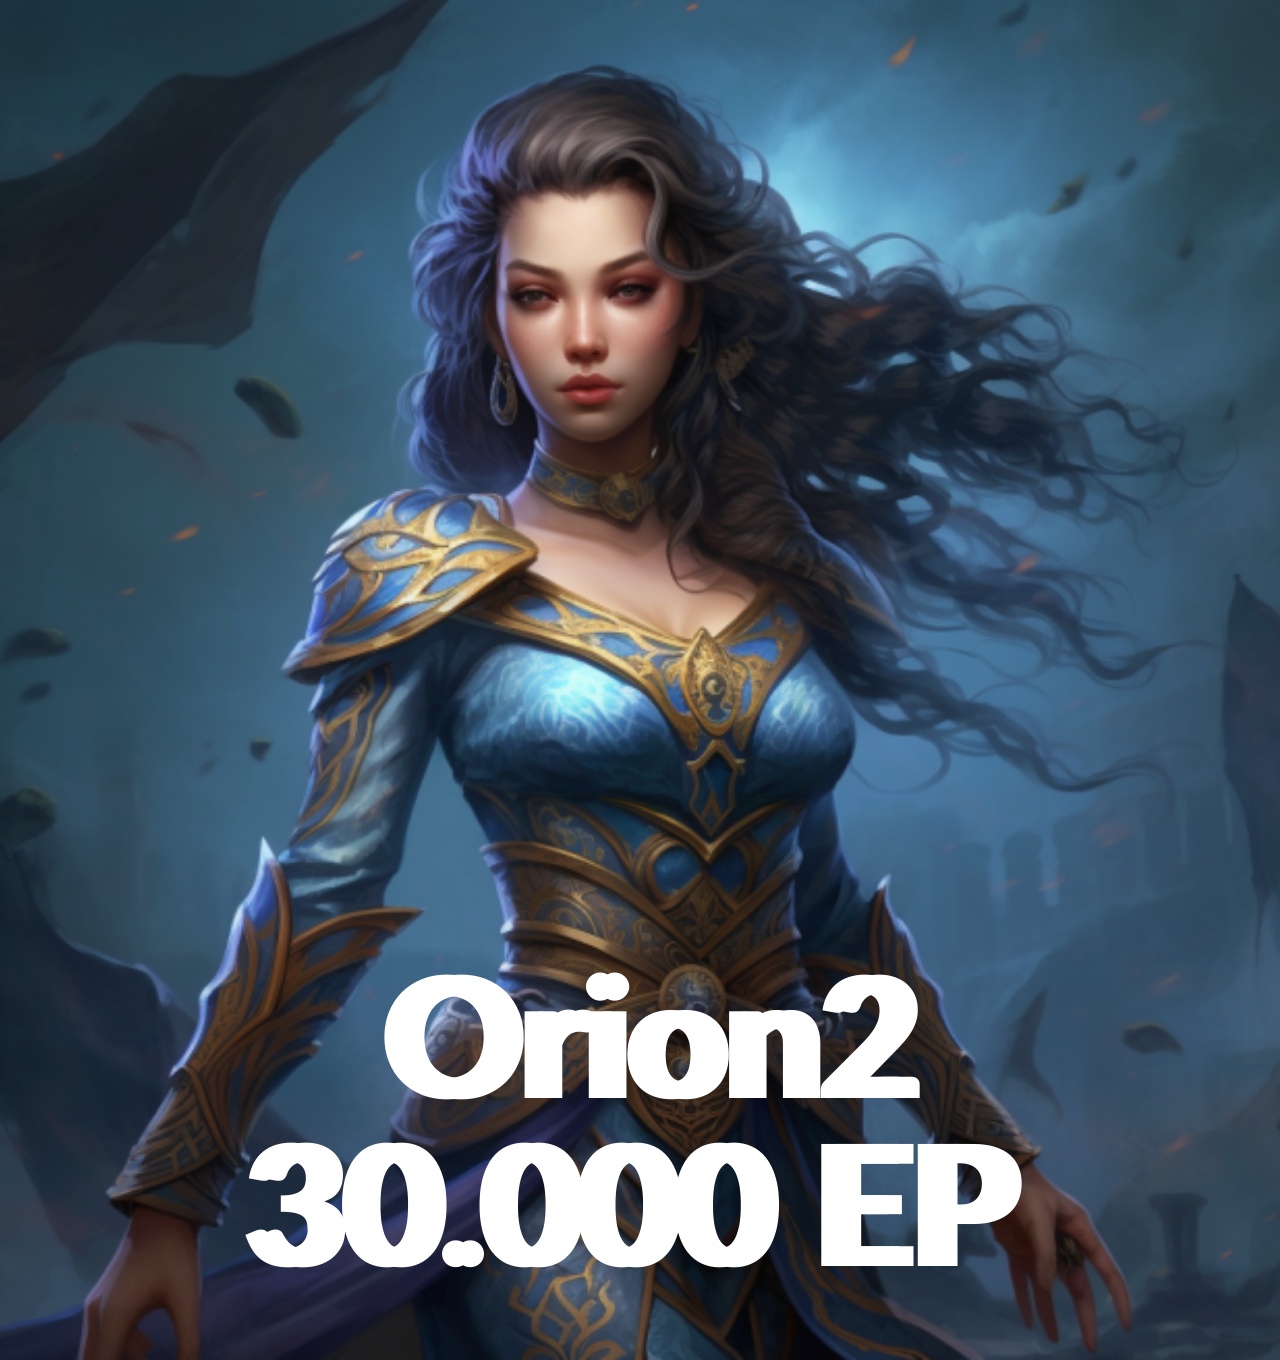 Orion2 30.000 EP